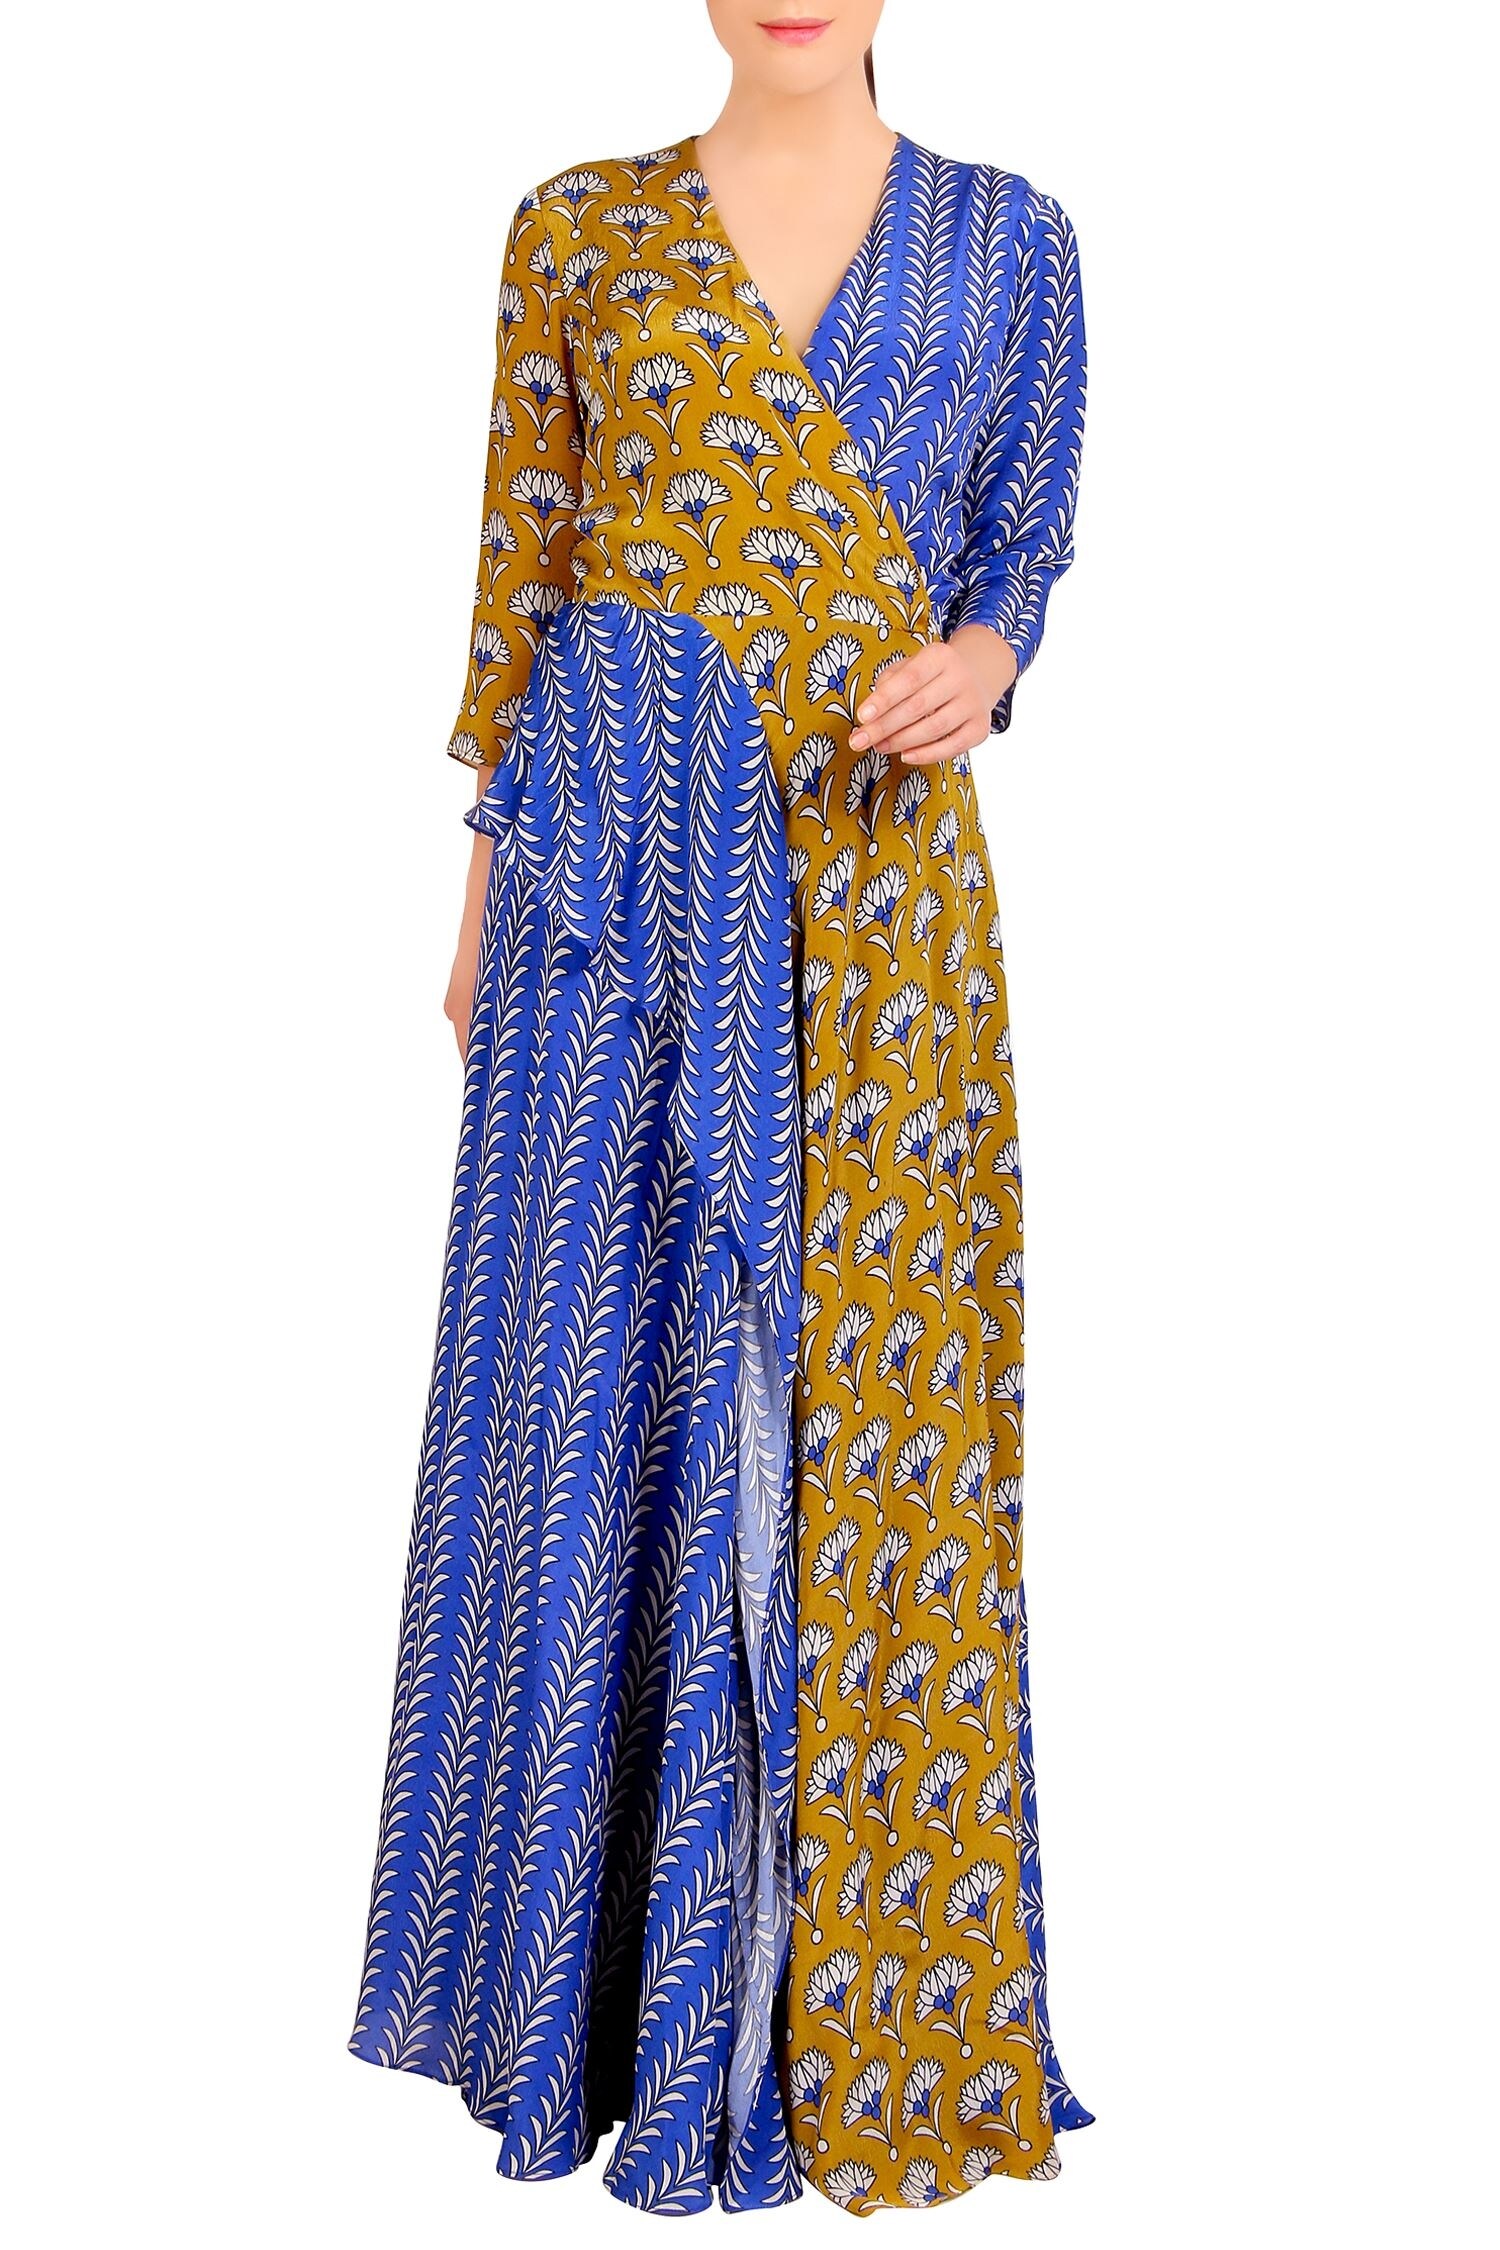 Soup by Sougat Paul Blue Printed Layered Dress For Women